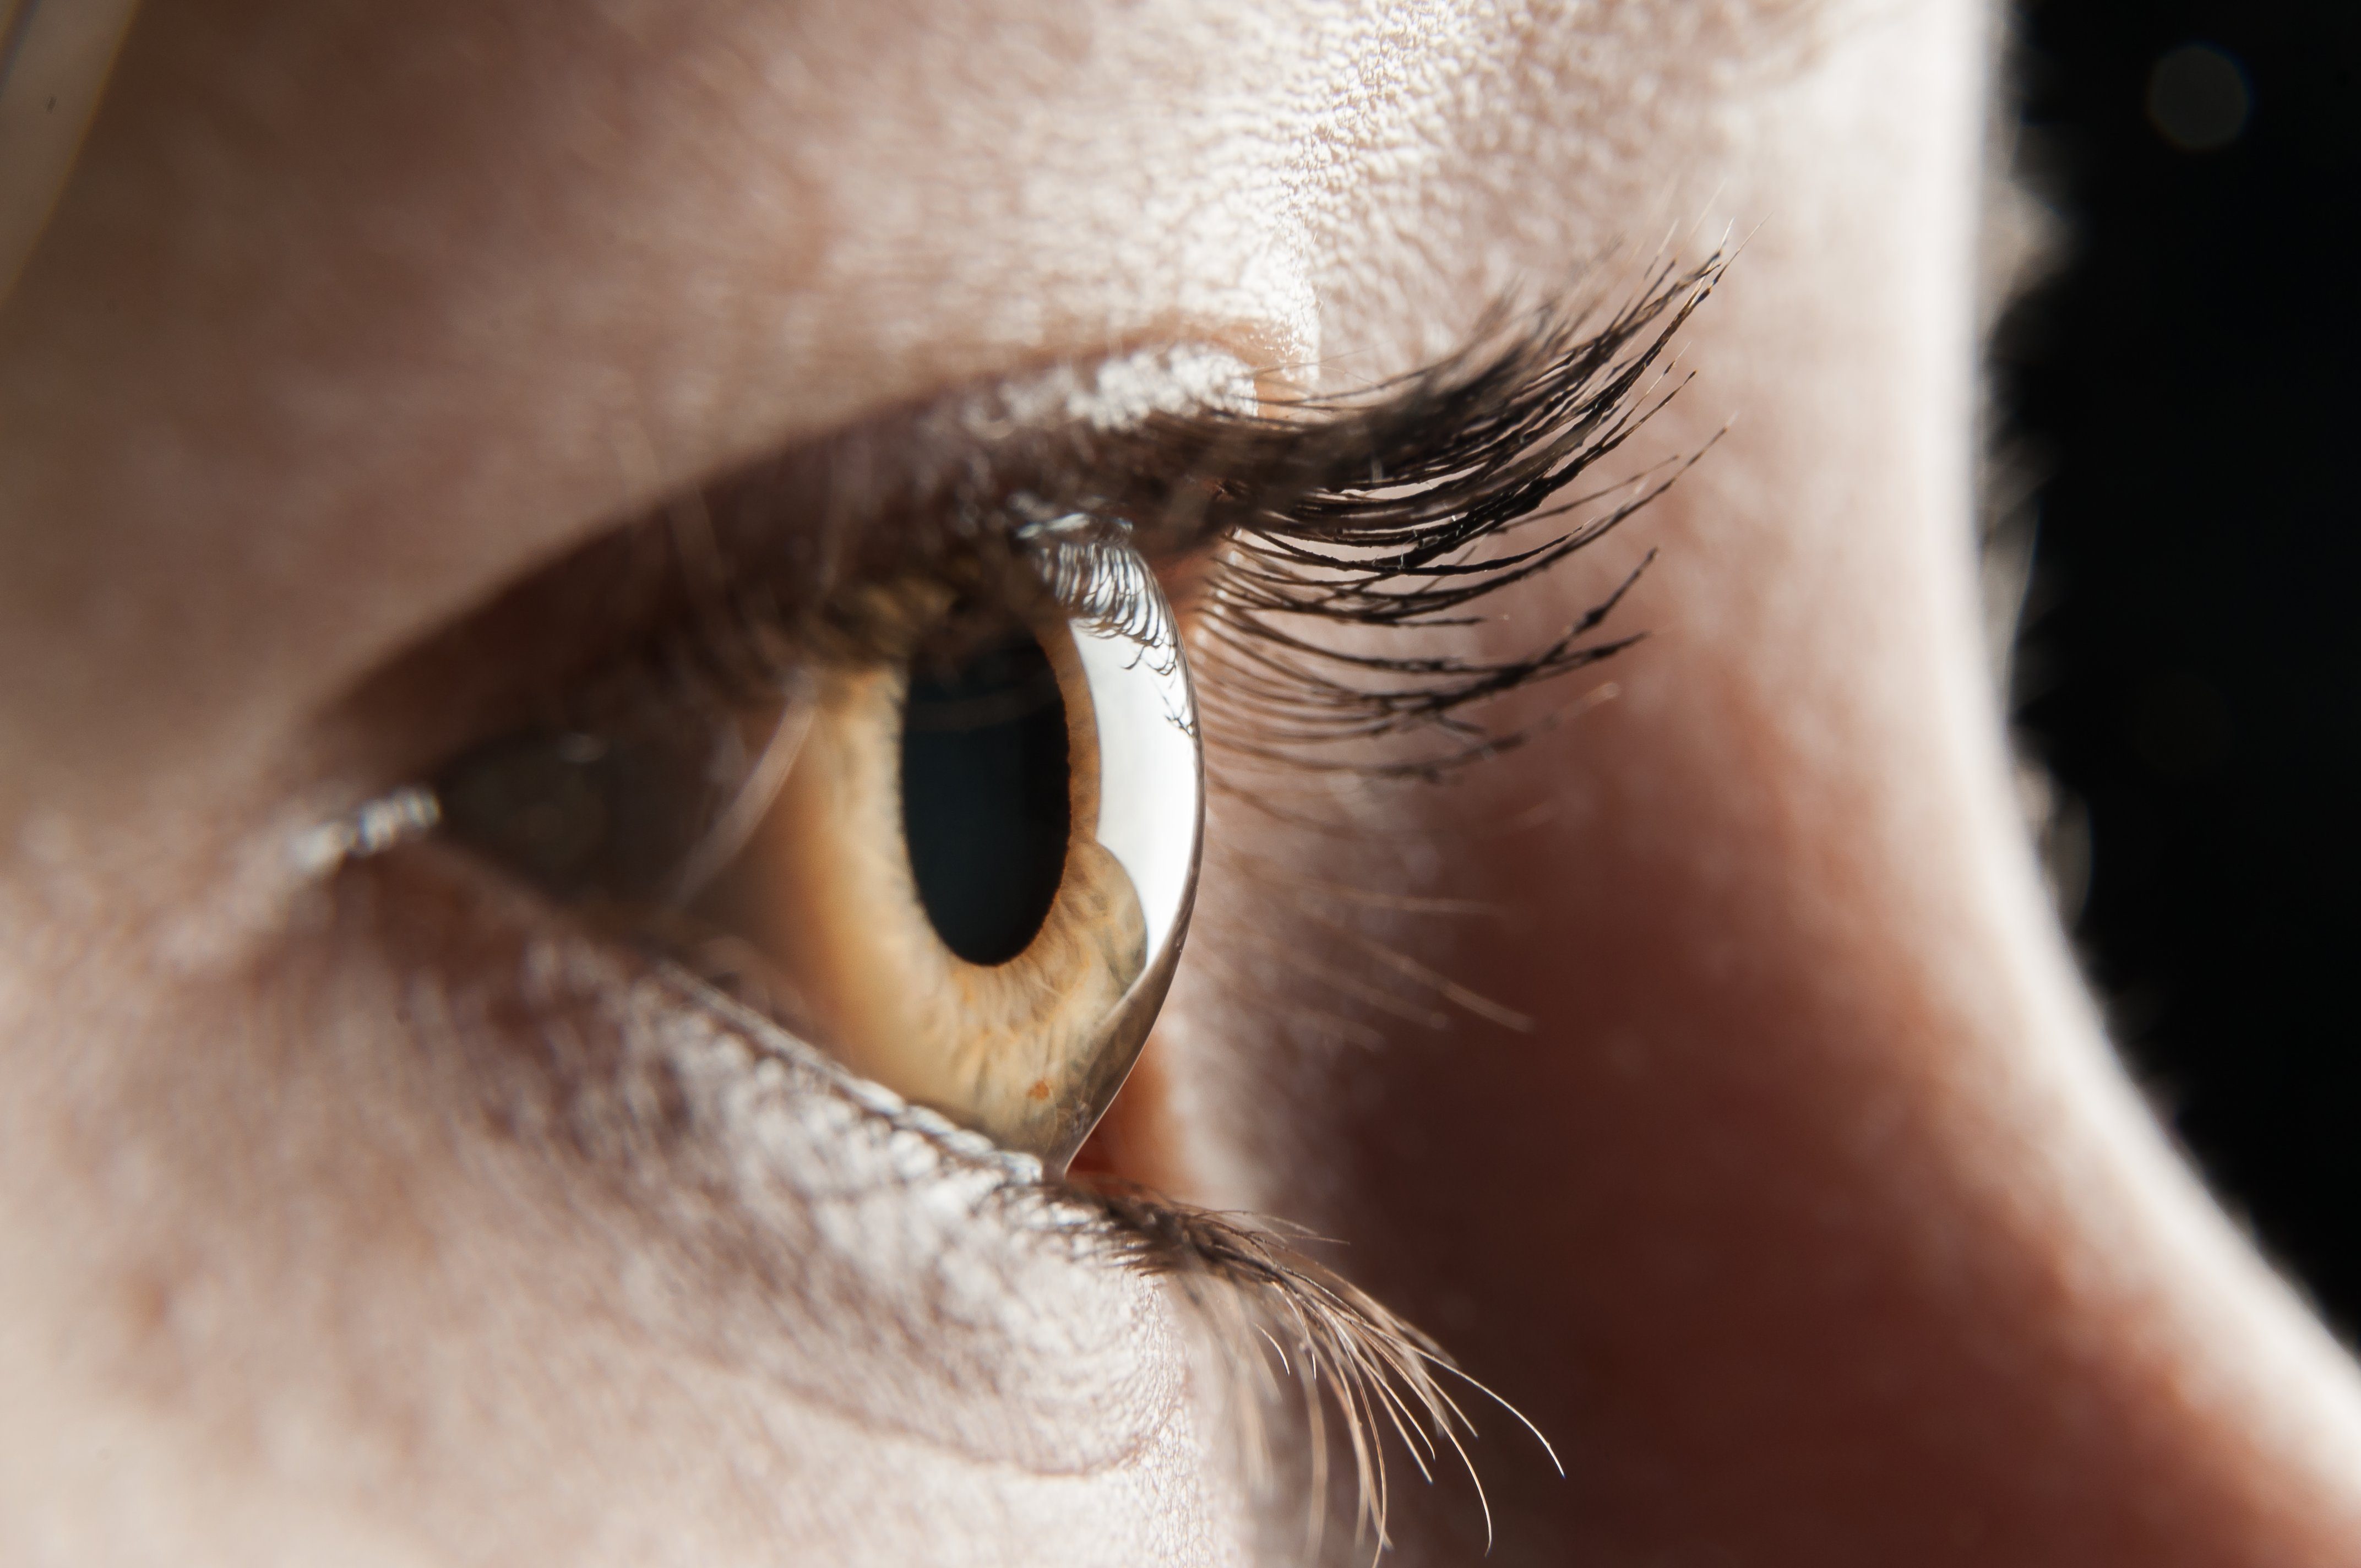 11 Signs Your Eyes Could Be in Danger